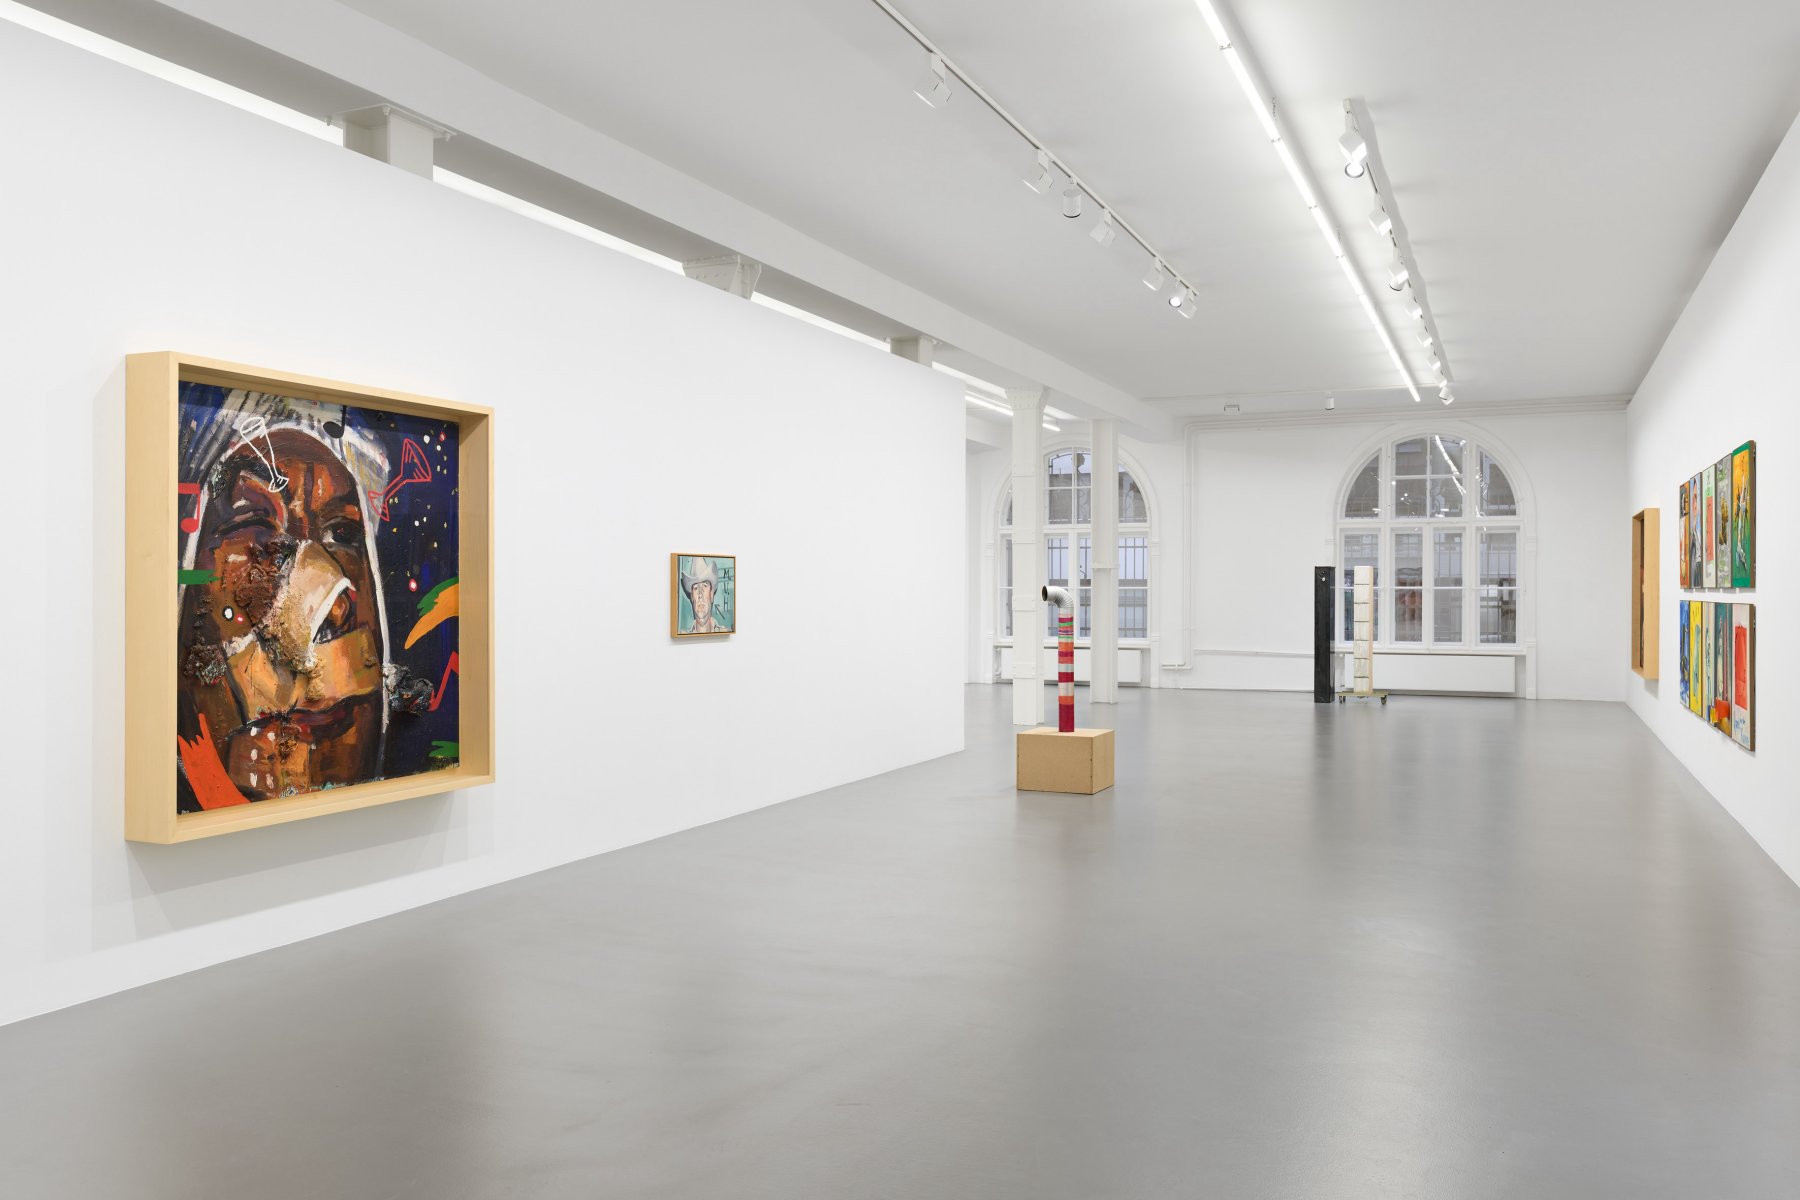 Installation image for Martin Kippenberger: heute denken - morgen fertig. Works from private collections from the 80s and 90s. Photographs by Wilhelm Schürmann and Andrea Stappert, at Galerie Max Hetzler